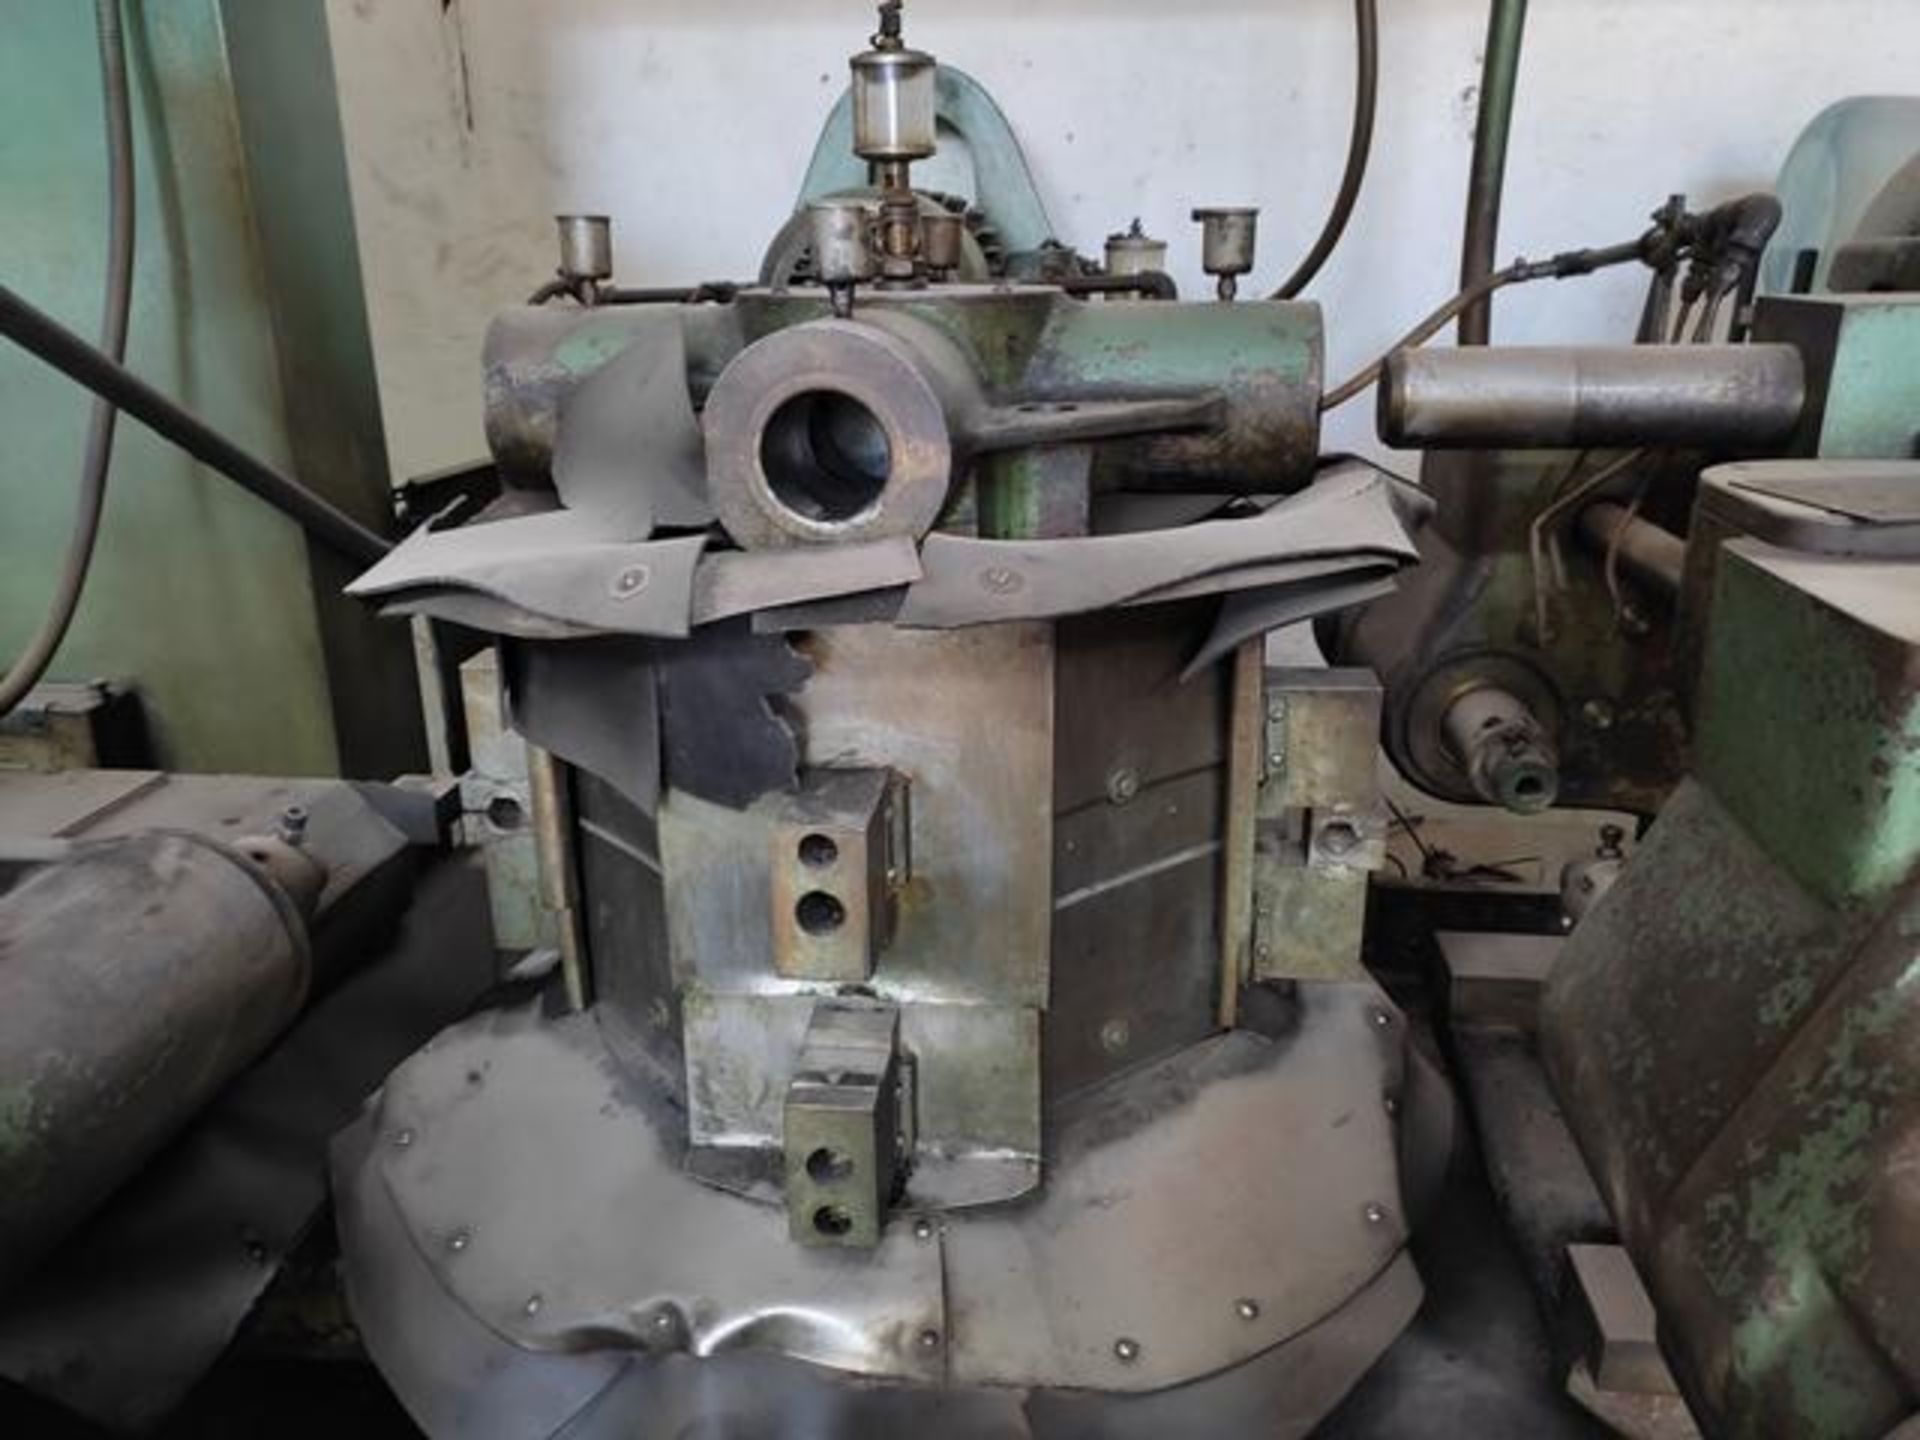 Goss 1-2-3 Chucking Machine, Serial: 2317: 7 Spindle, 3-1/2” Diameter, 4 Chucking Positions with - Image 22 of 26